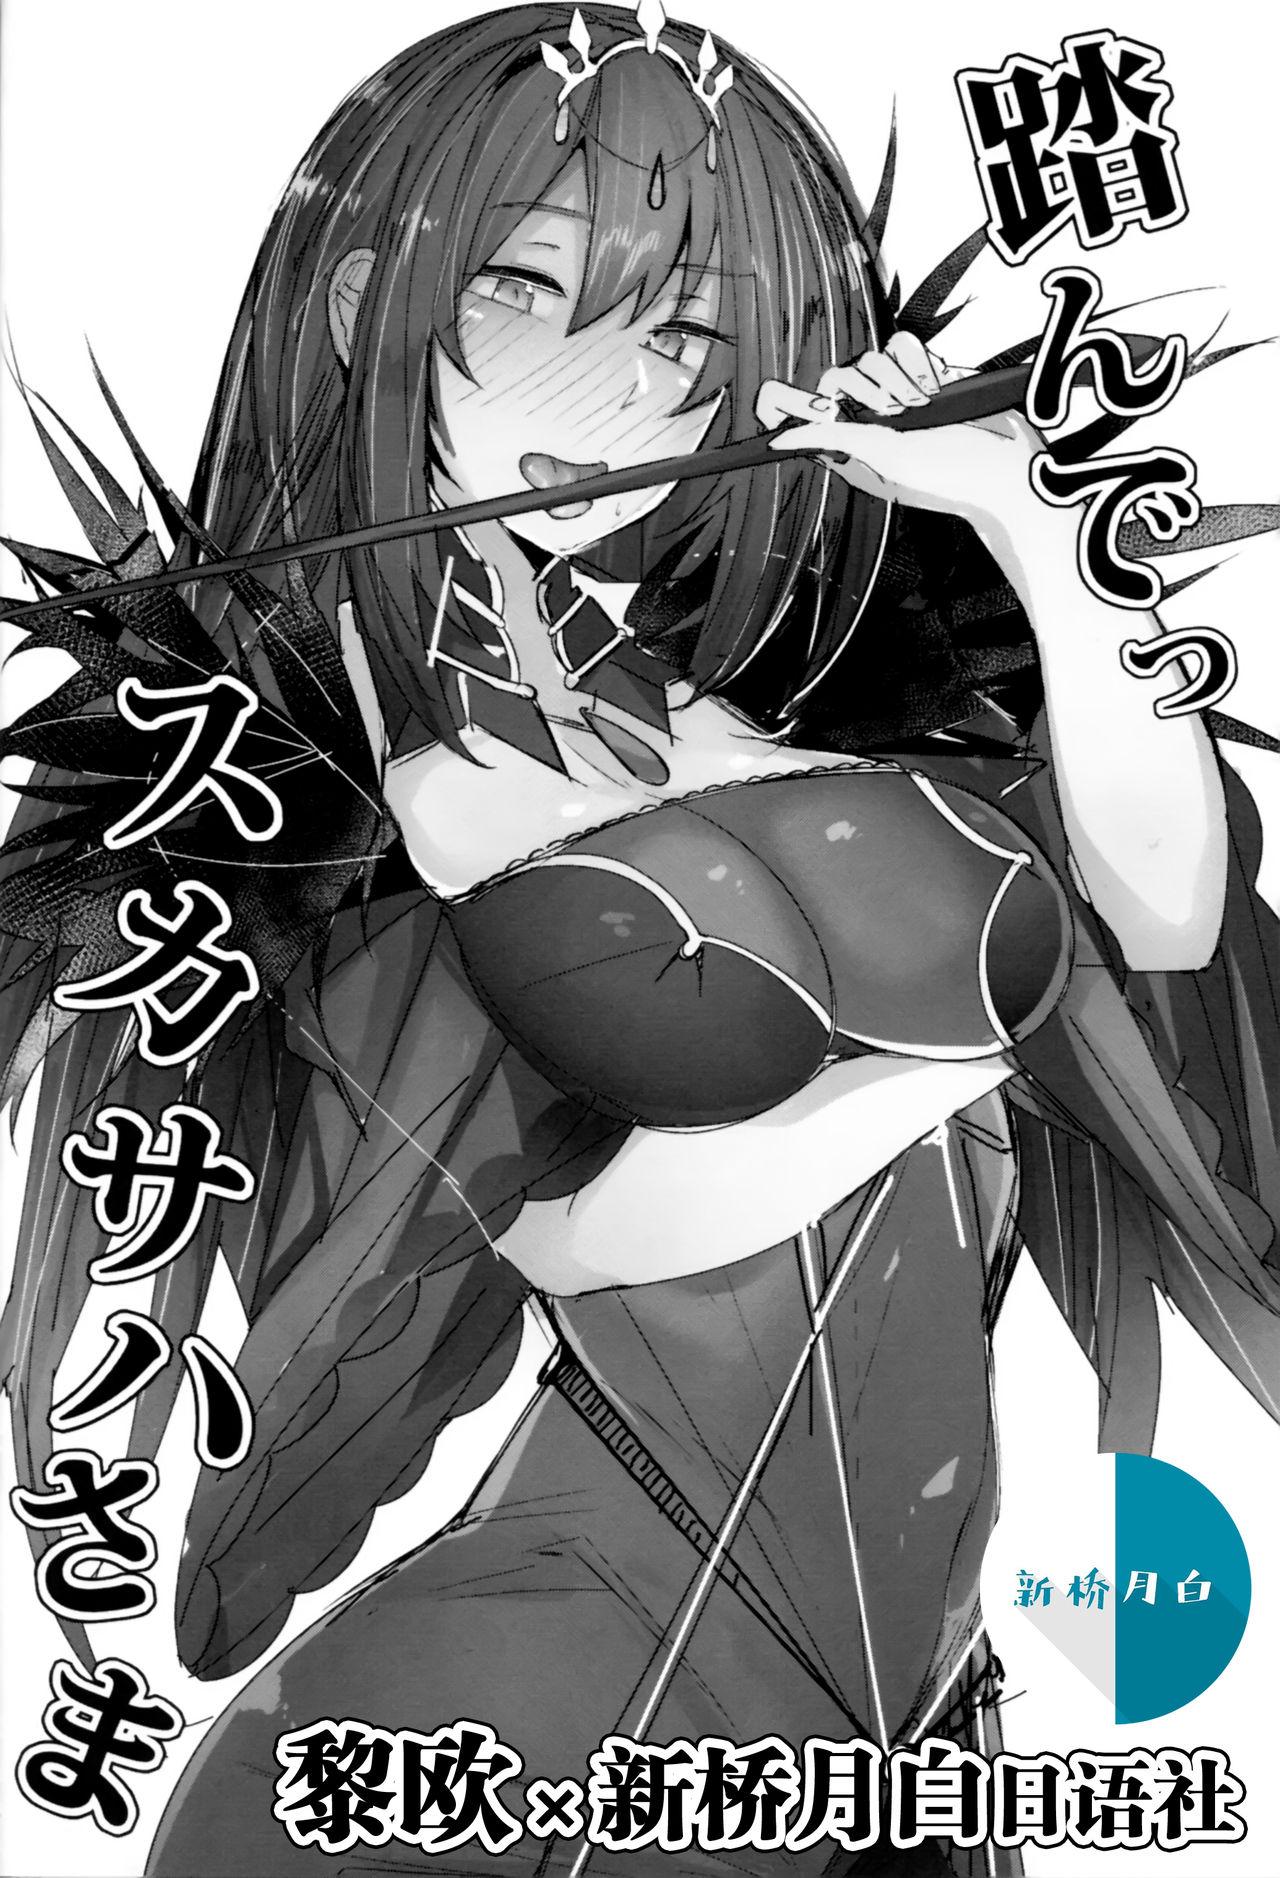 Tattooed Funde Scathach-sama - Fate grand order Shesafreak - Page 1